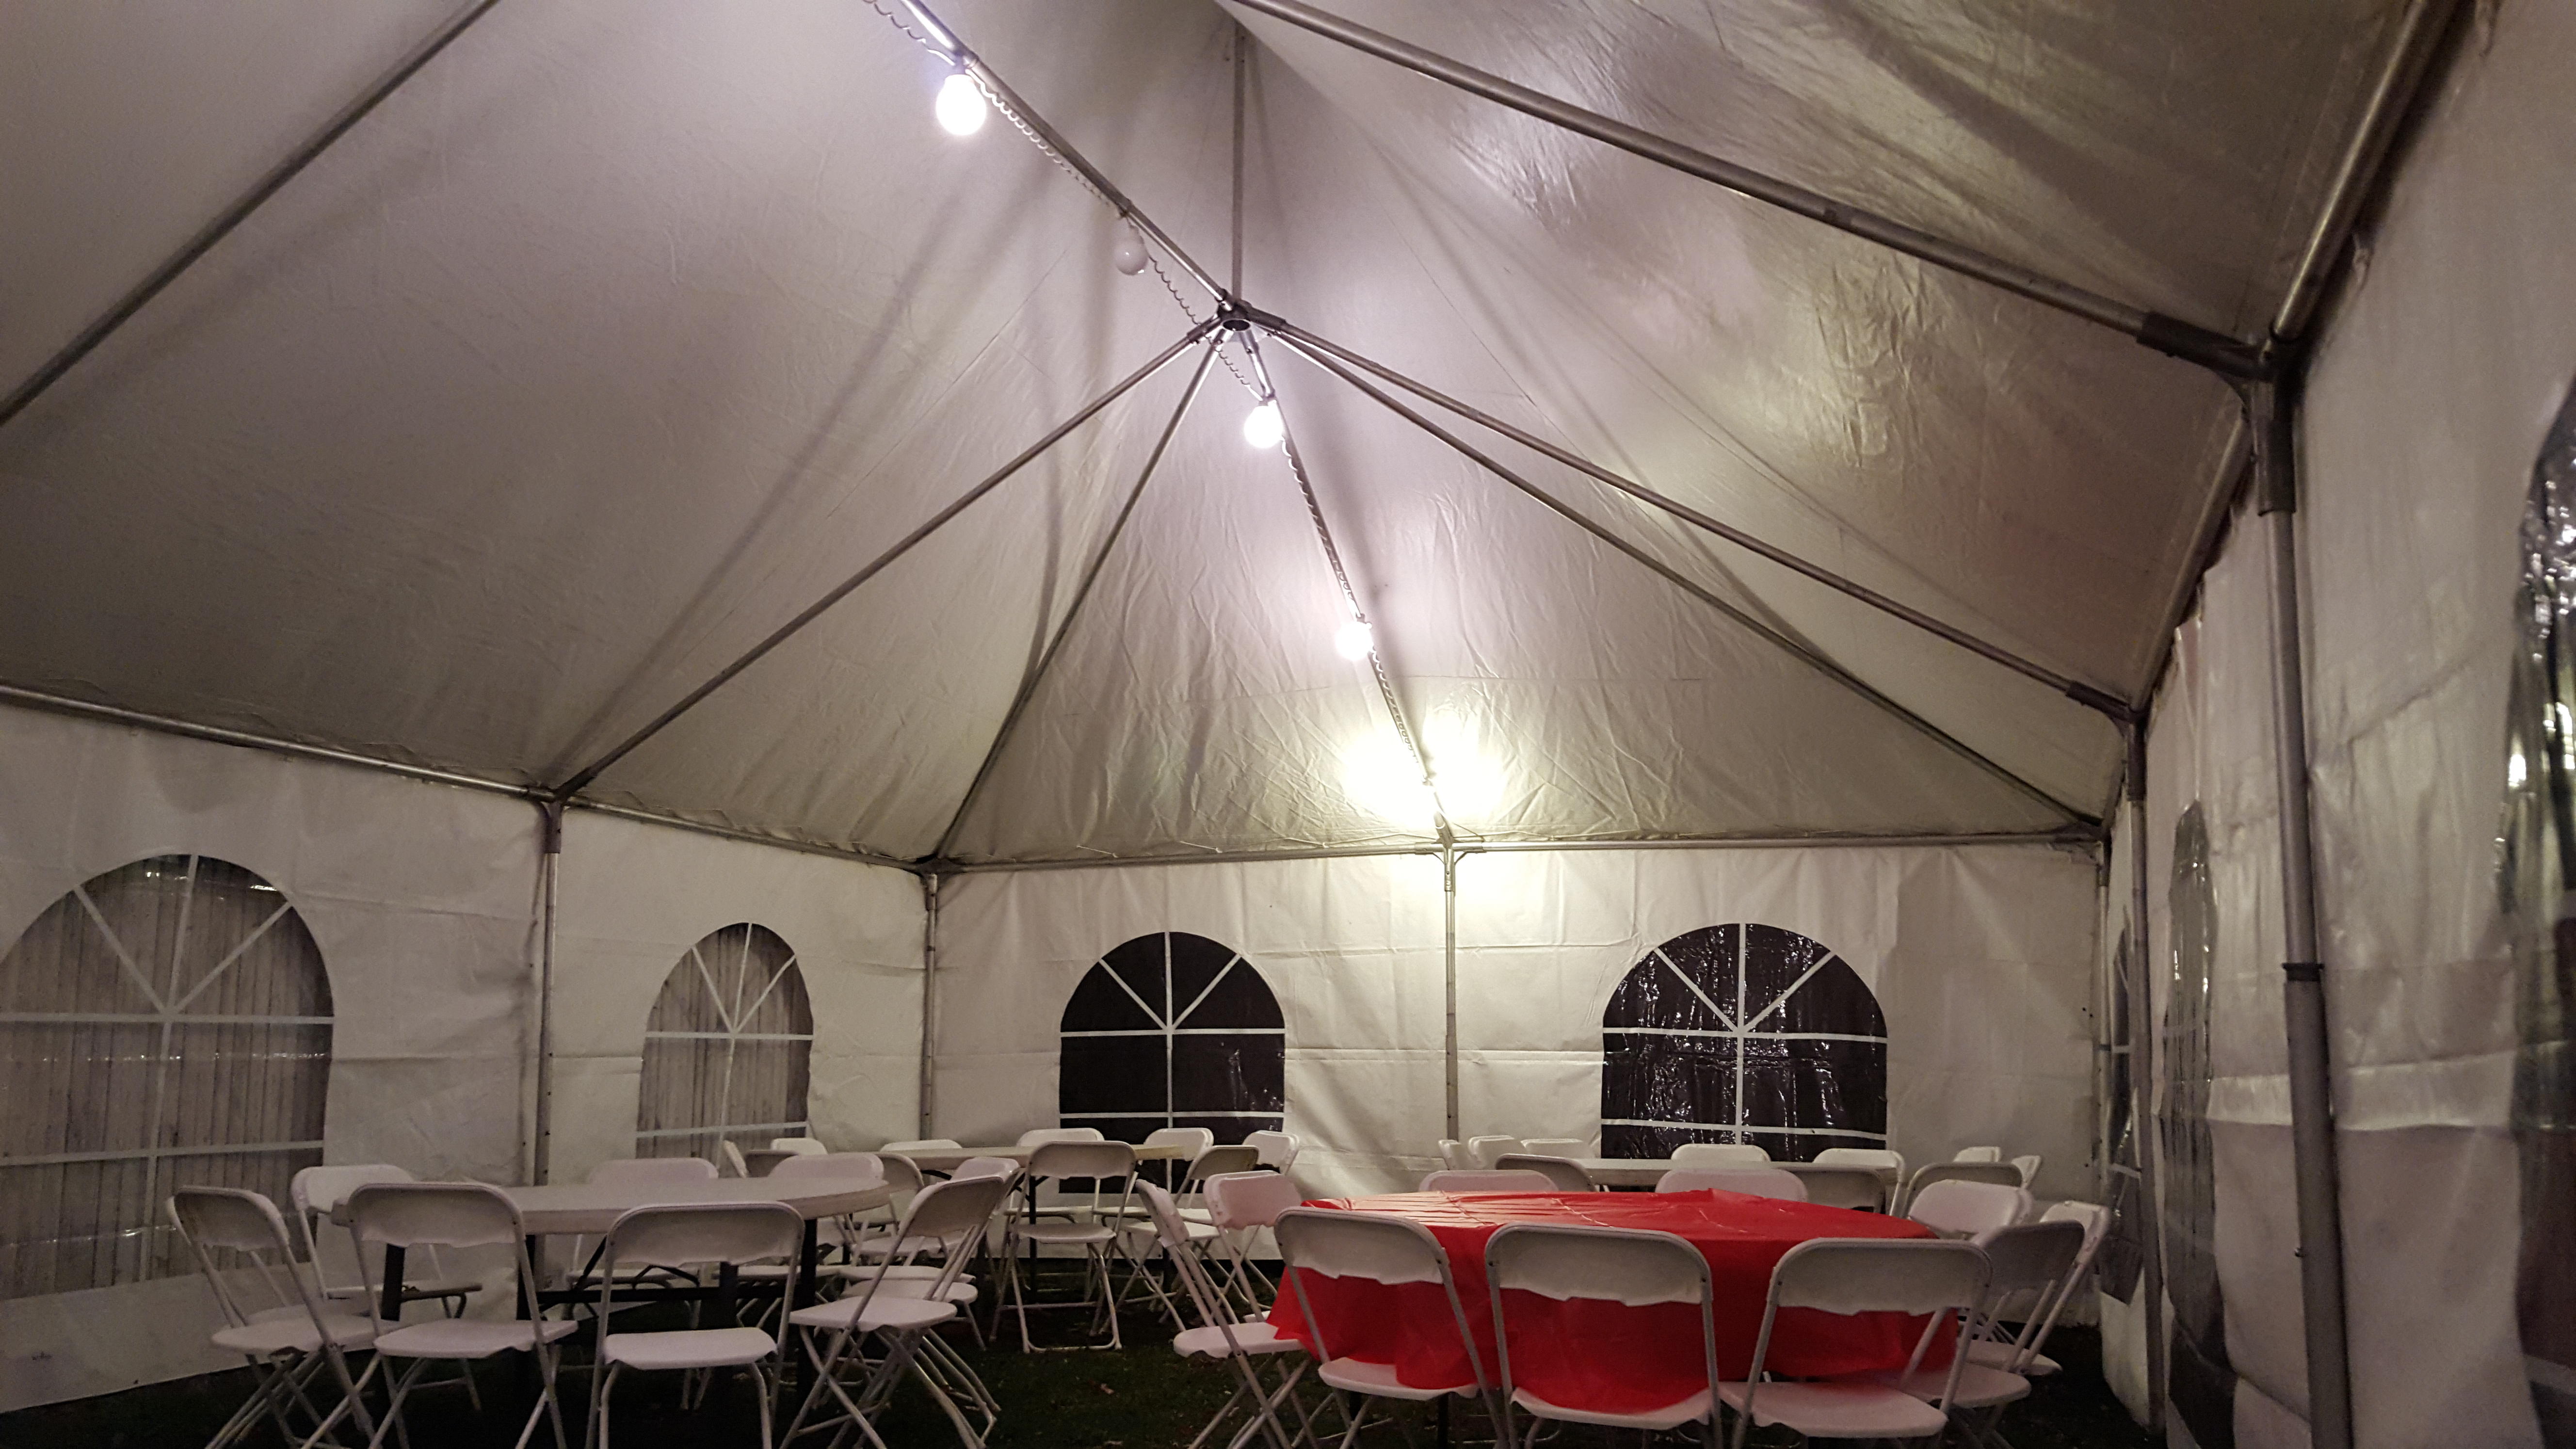 TENT RENTALS LONG ISLAND
BACKYARD TENT RENTALS FOR LONG ISLAND.WE ALSO HAVE TABLE RENTALS AND CHAIR RENTALS LONG ISLAND